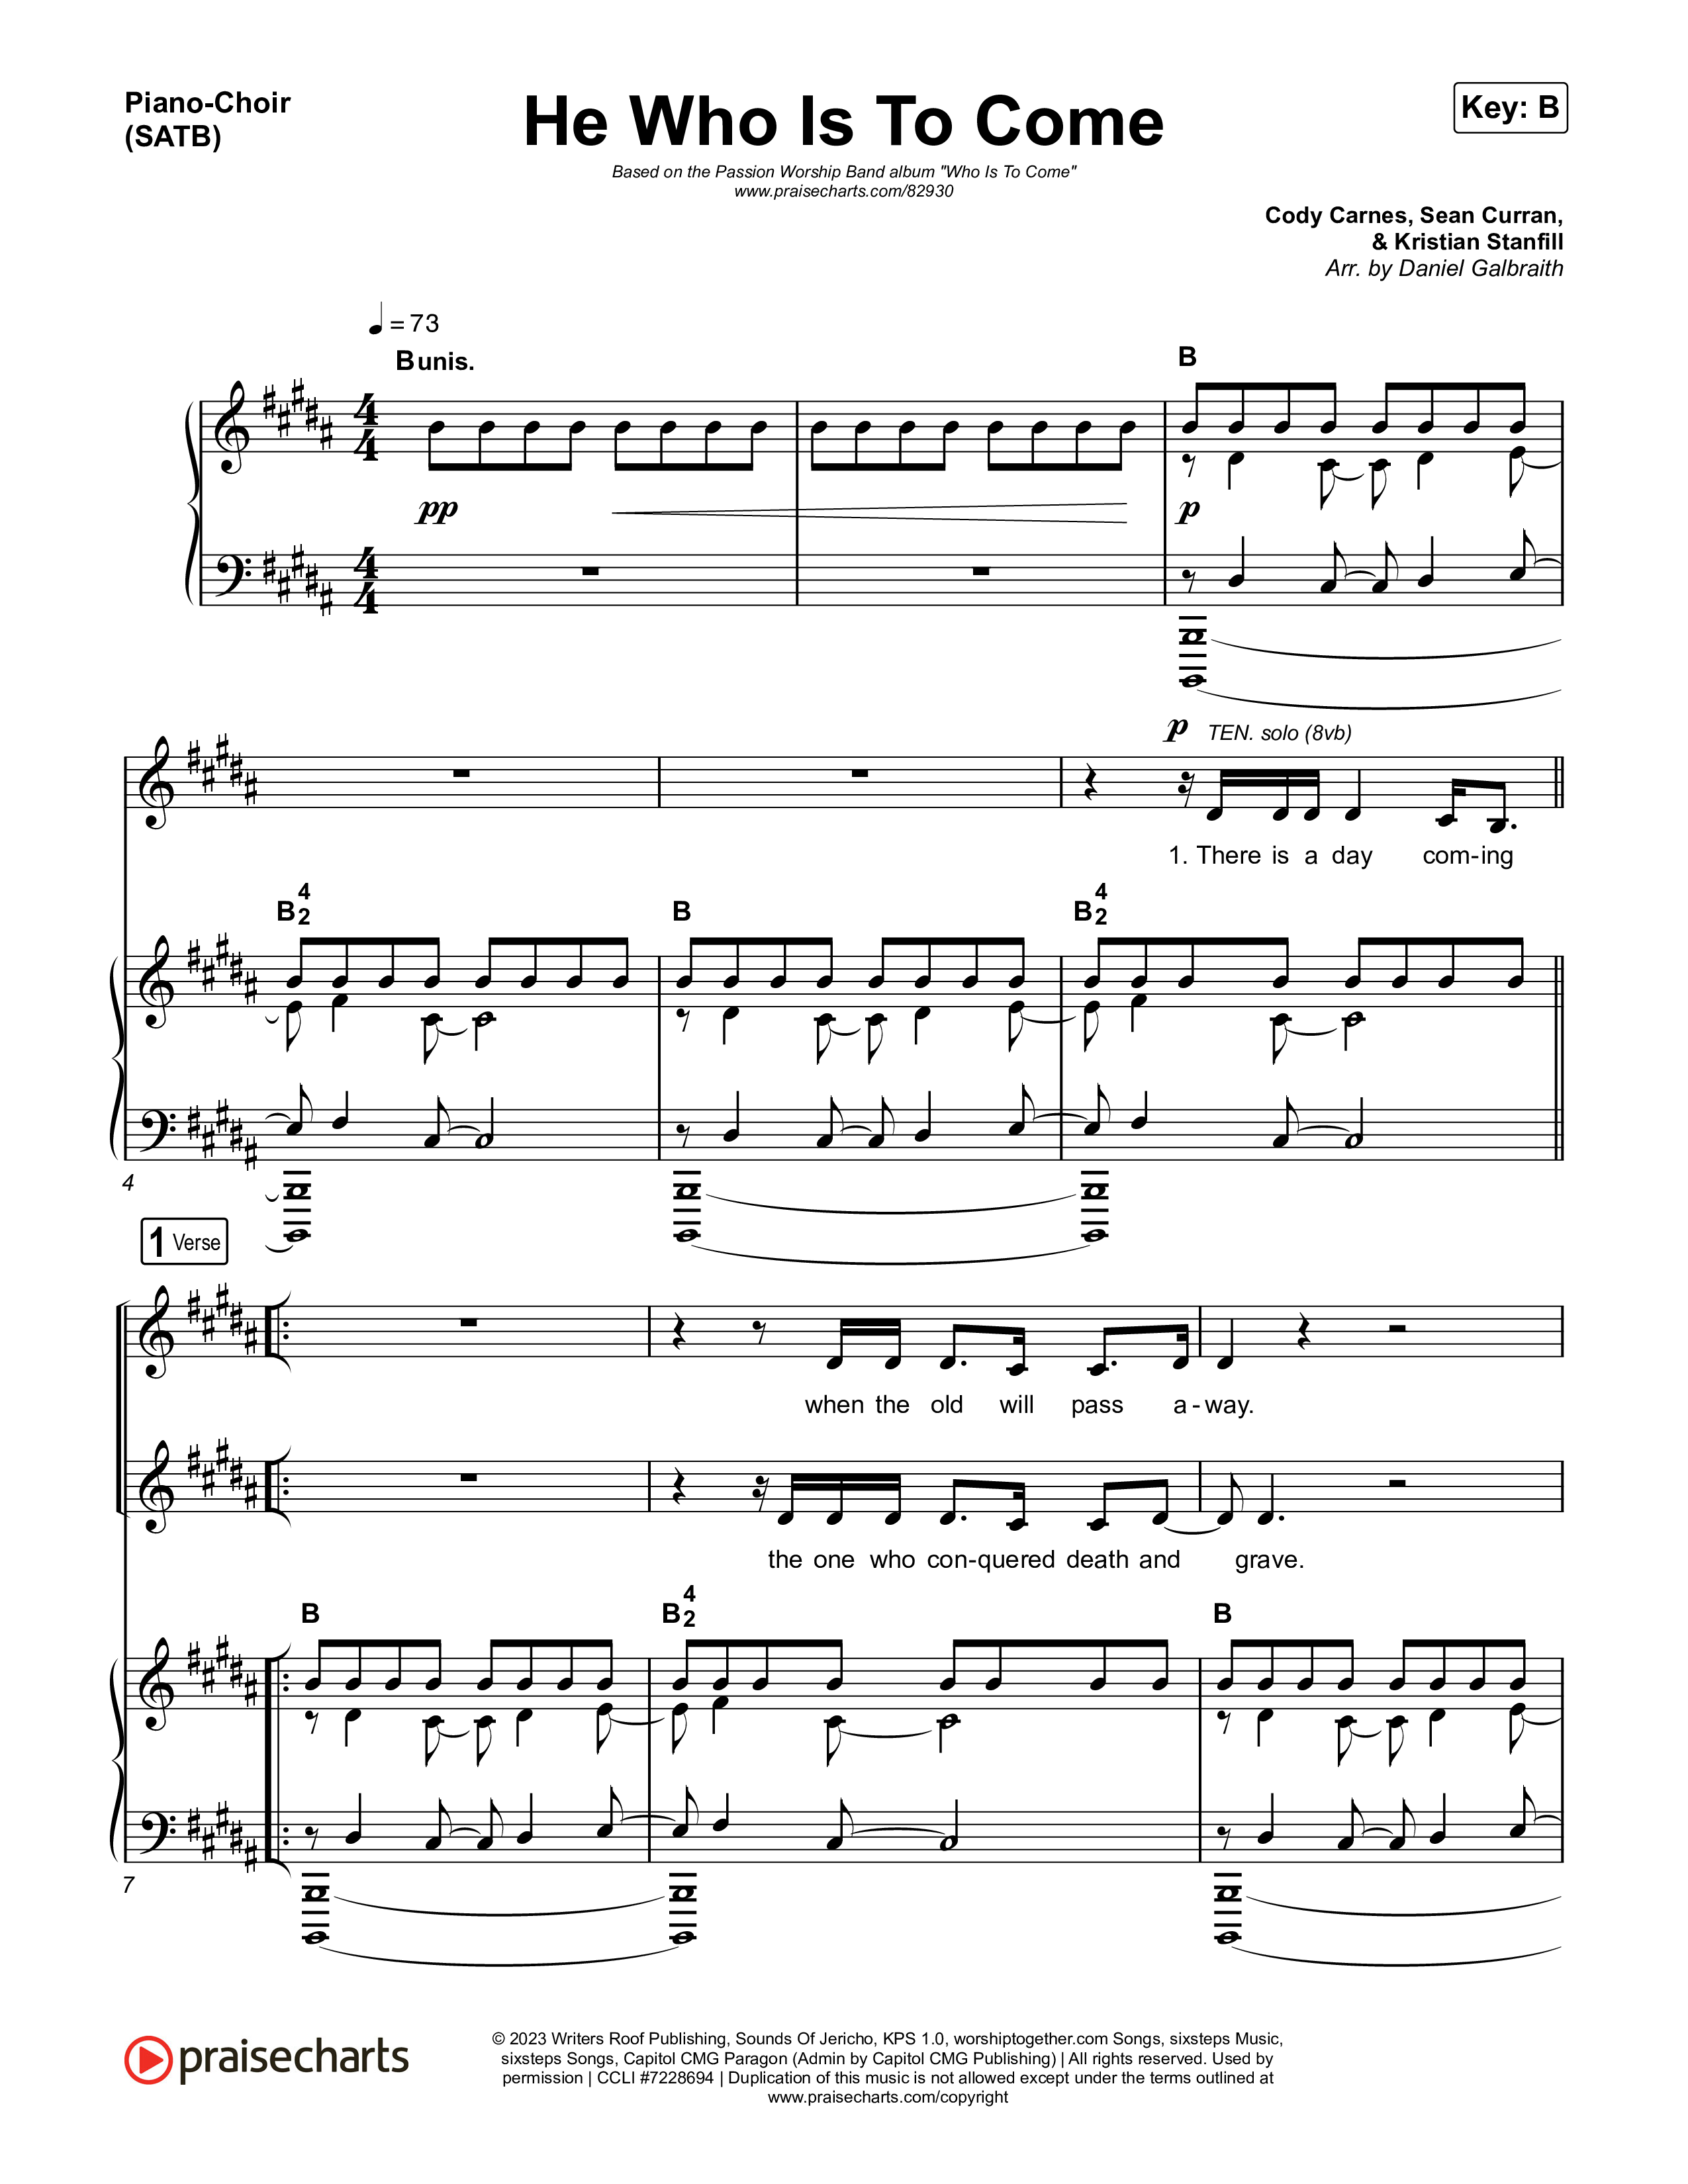 He Who Is To Come Piano/Vocal (SATB) (Passion / Cody Carnes / Kristian Stanfill)